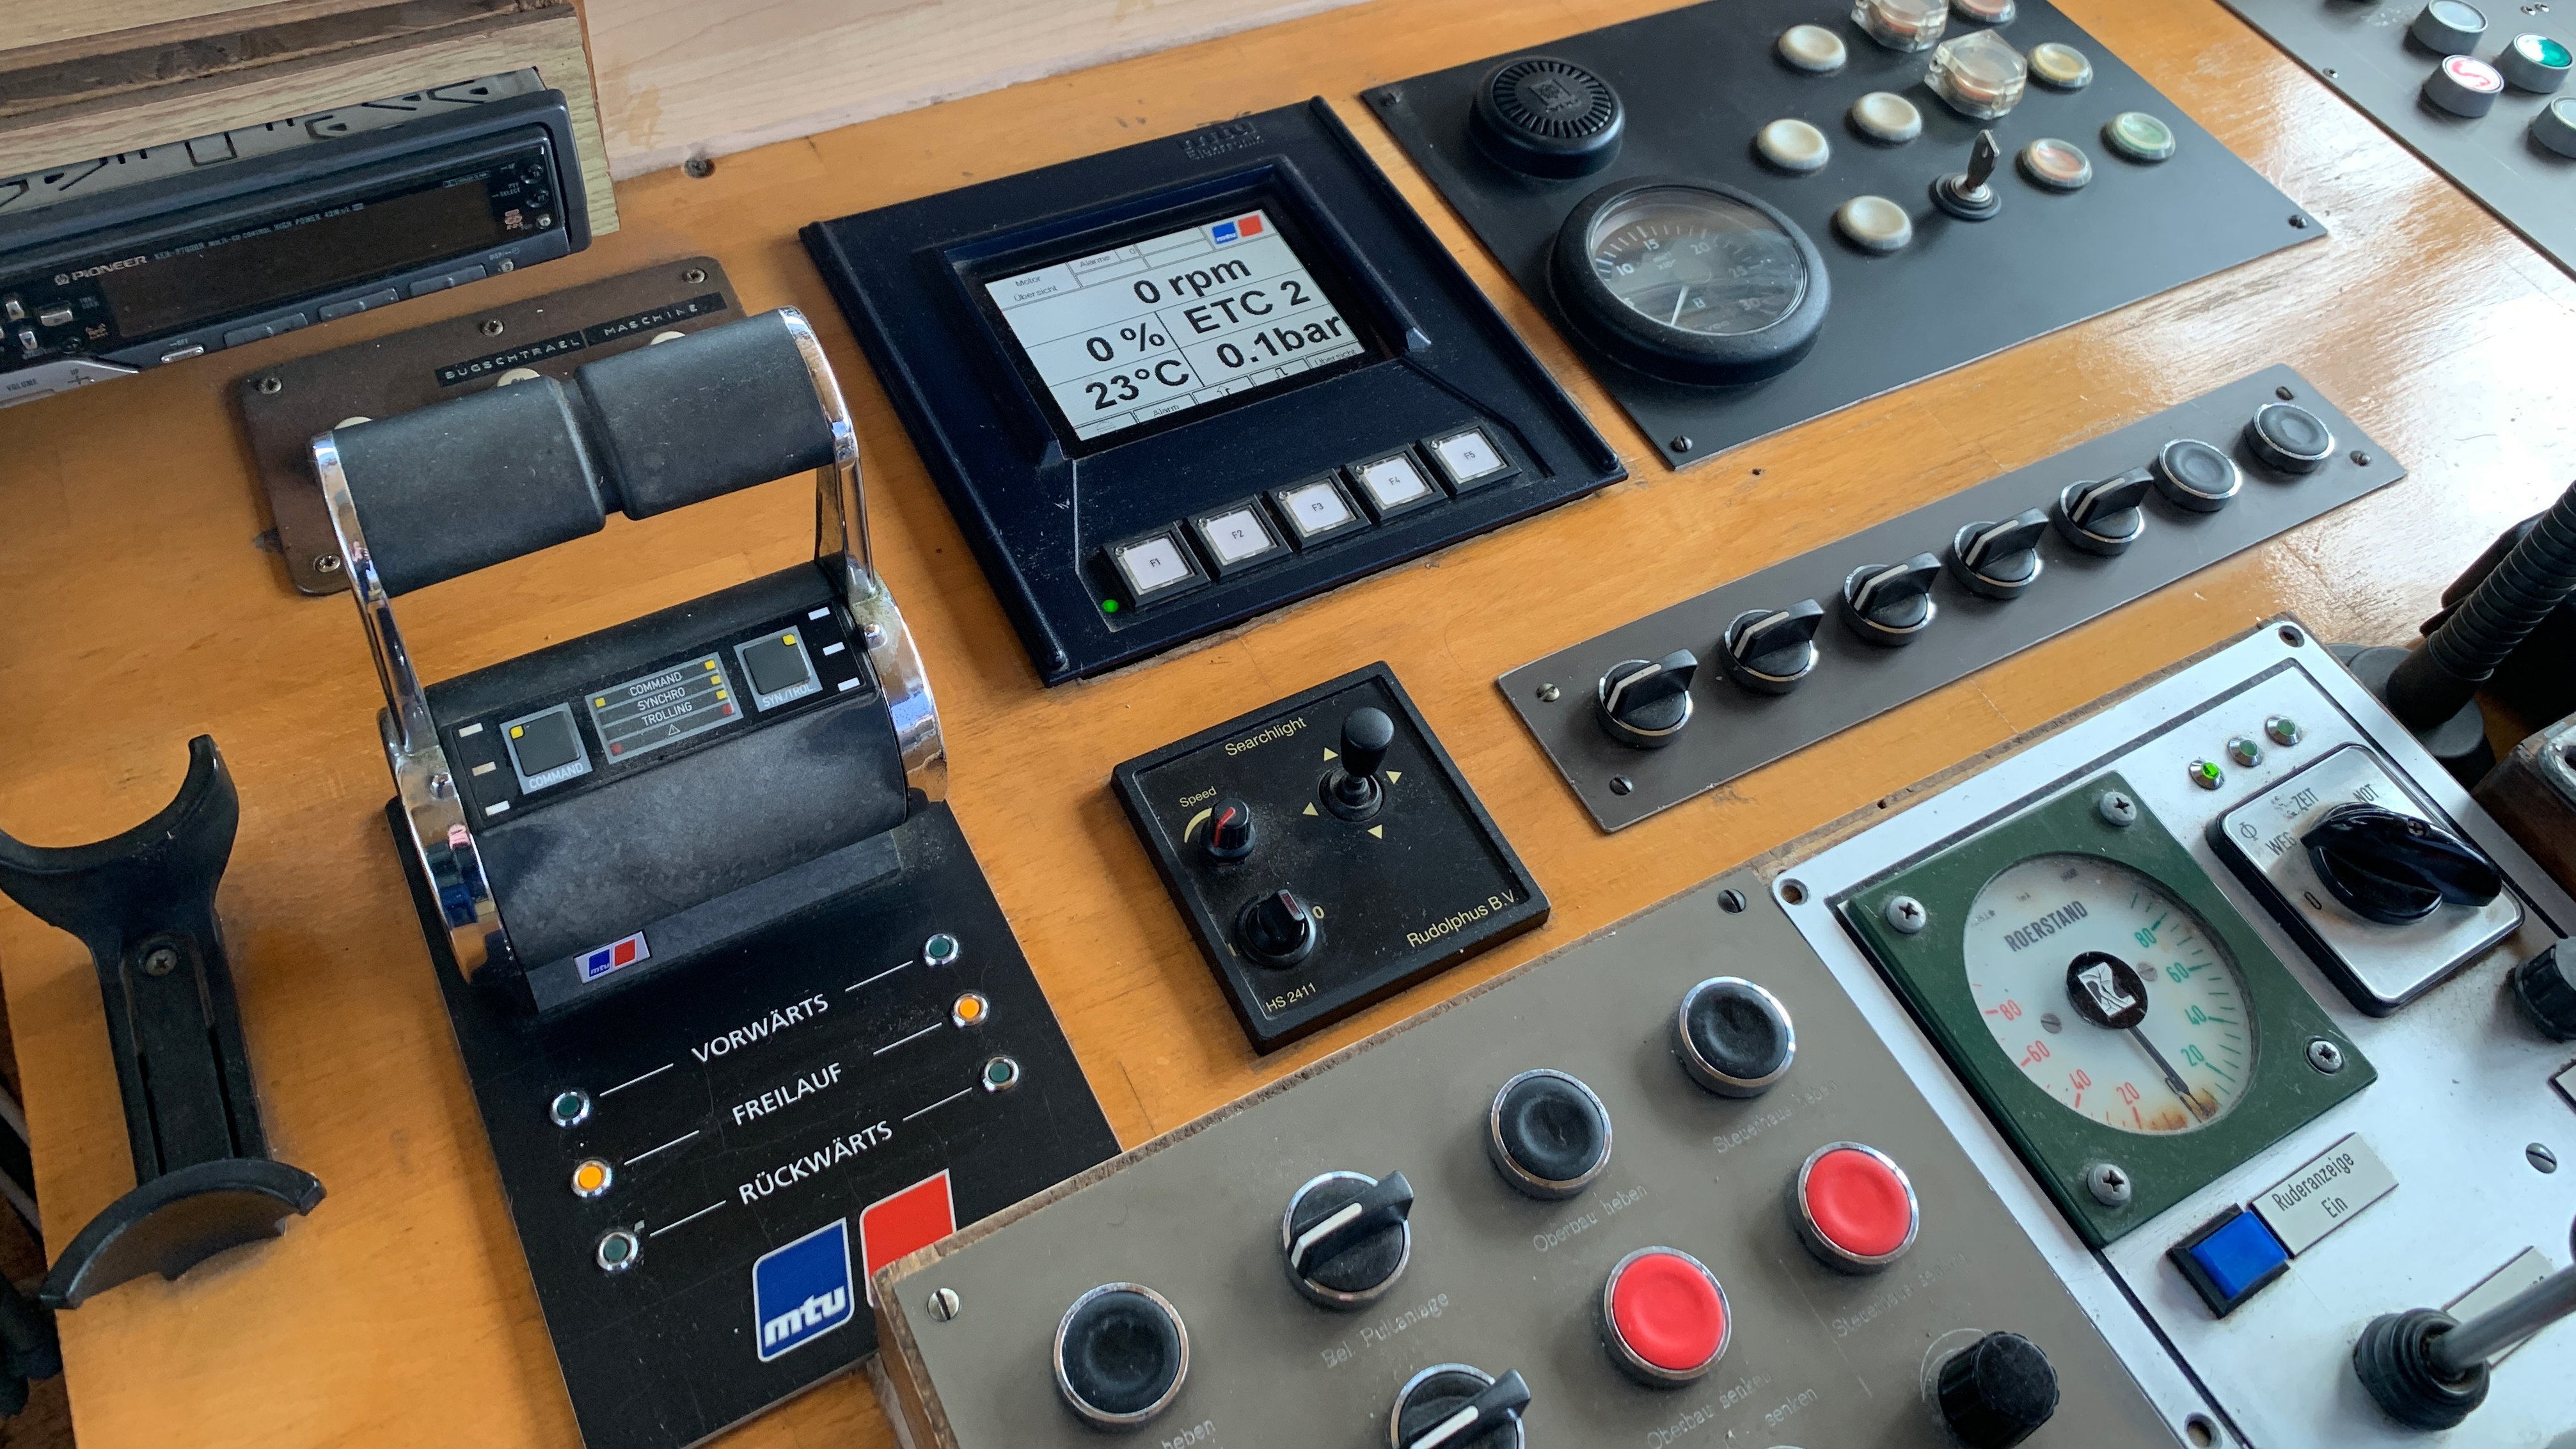 The image shows an old bridge panel with control lever, indicators and push buttons mounted on a wodden bridge console